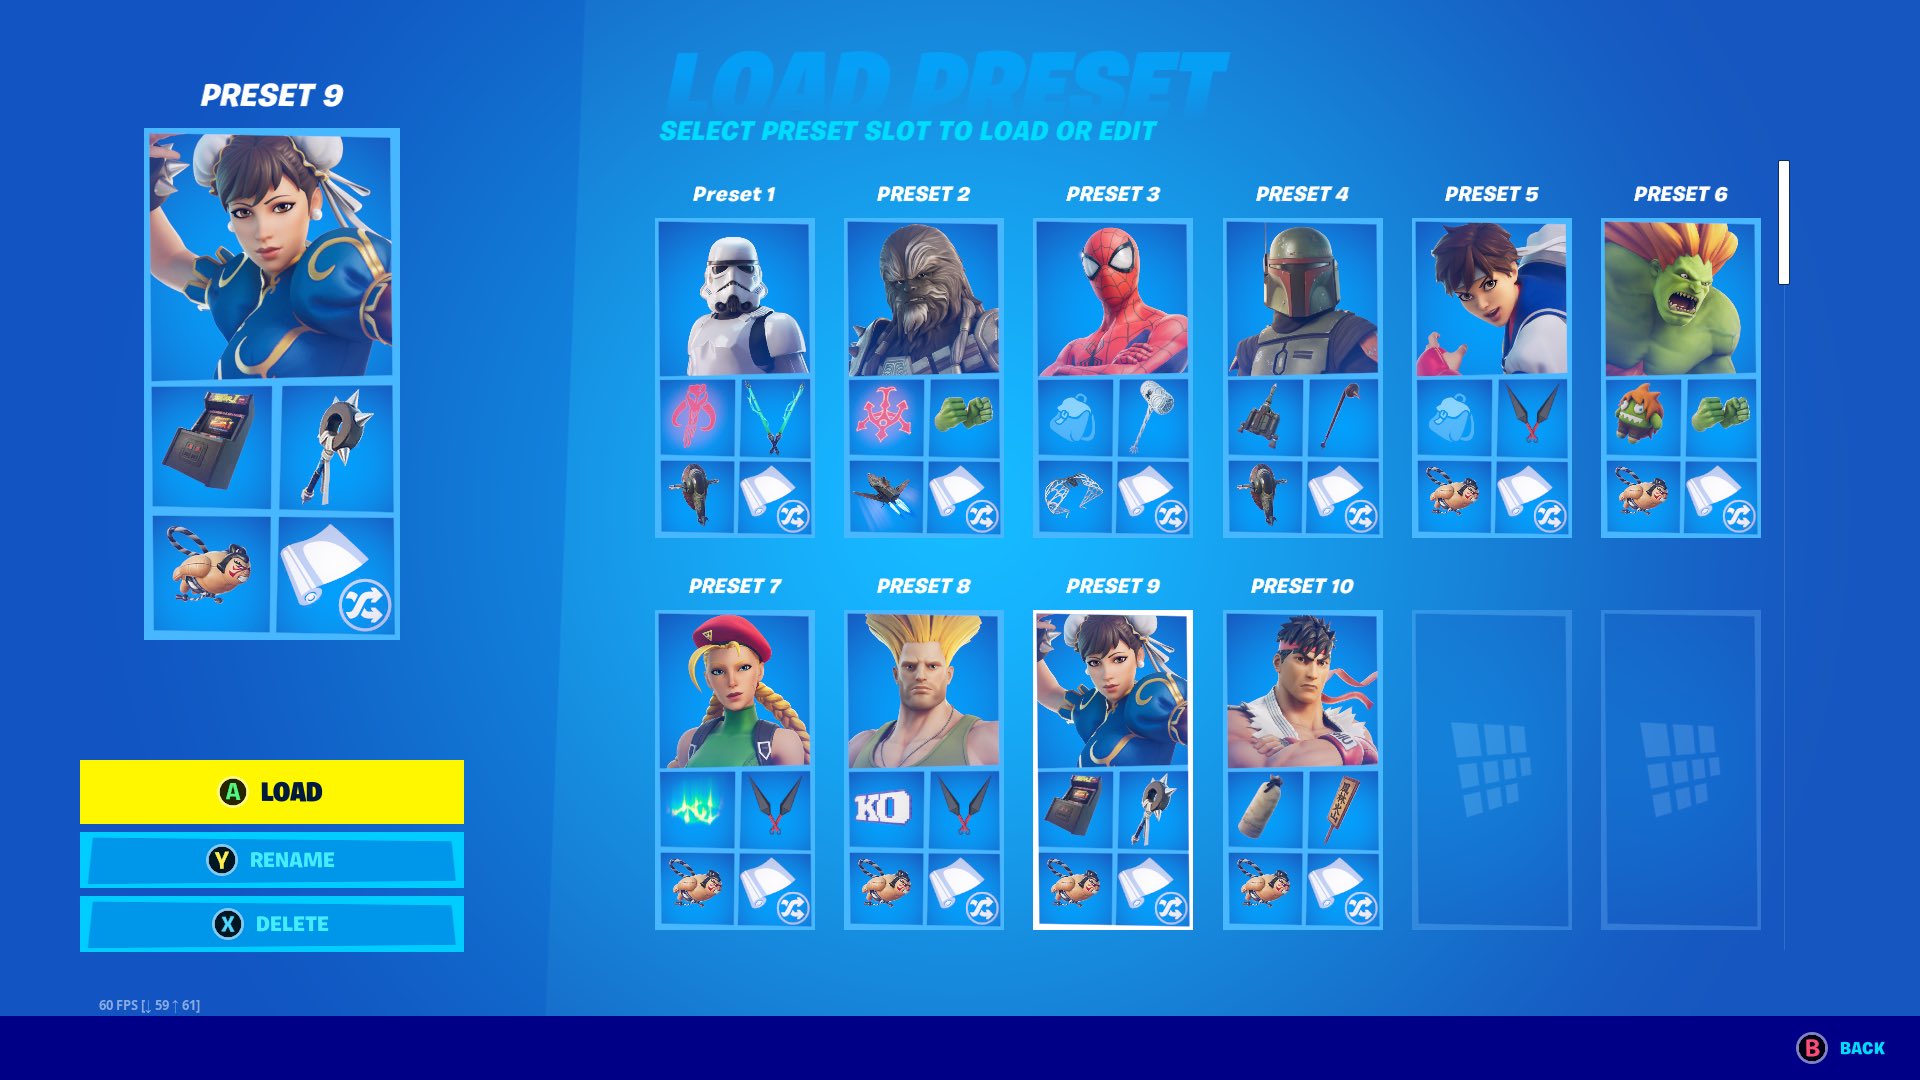 Fortnite Adds Street Fighter's Cammy and Guile